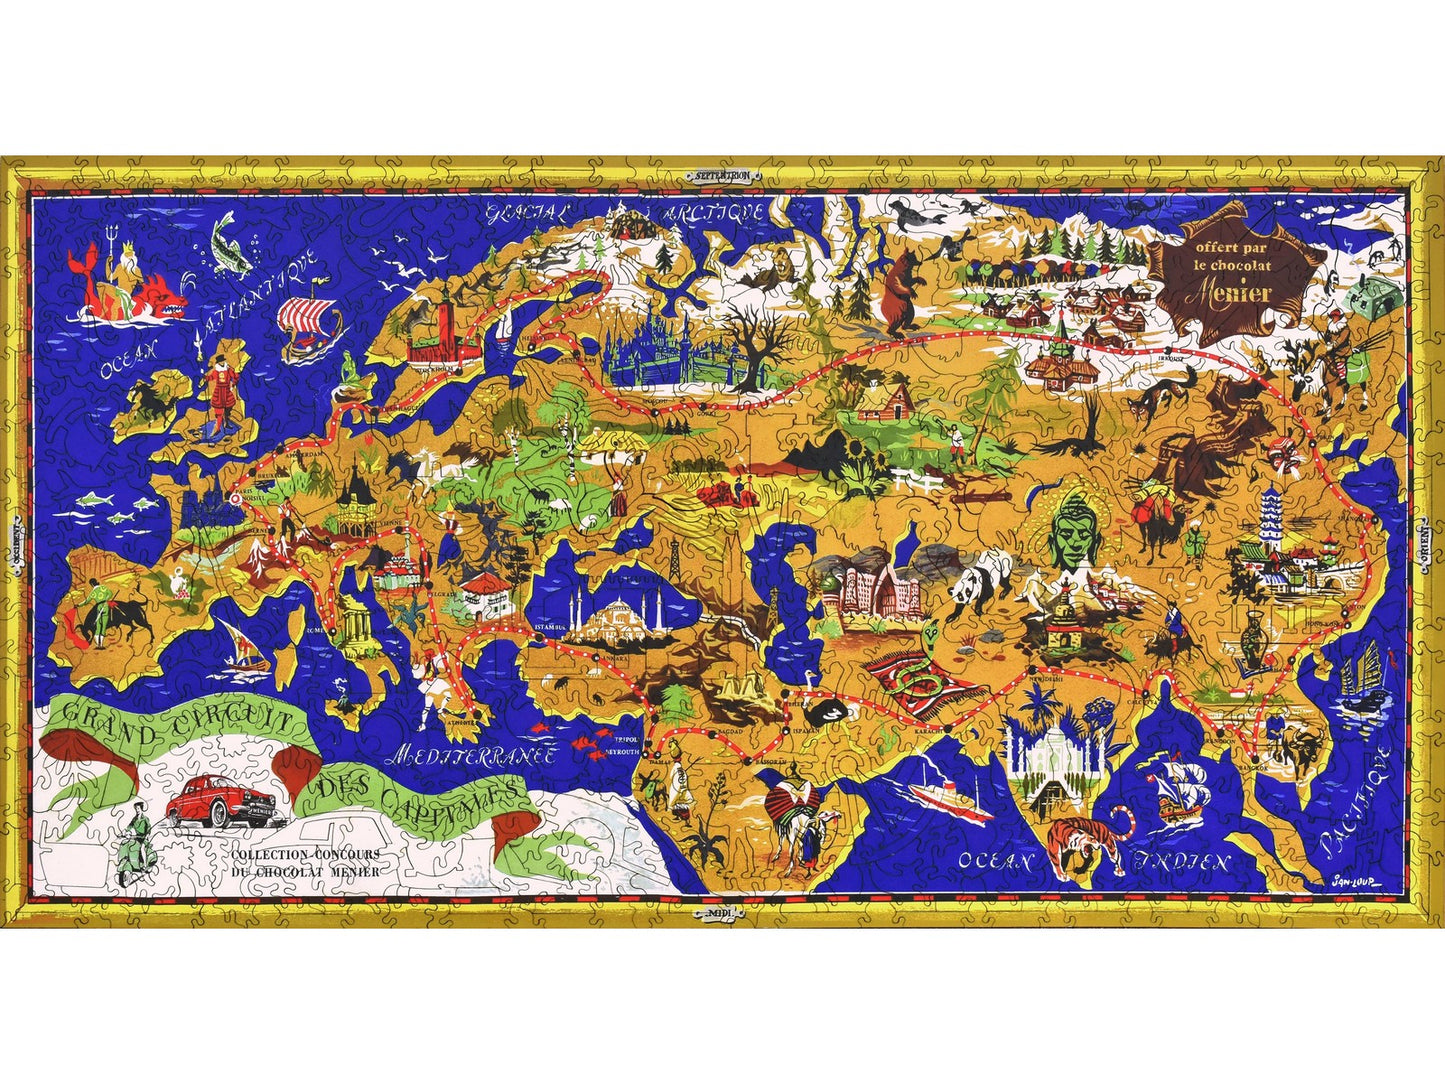 The front of the puzzle, Grand Circuit Des Capitales, with a map of Europe and Asia.